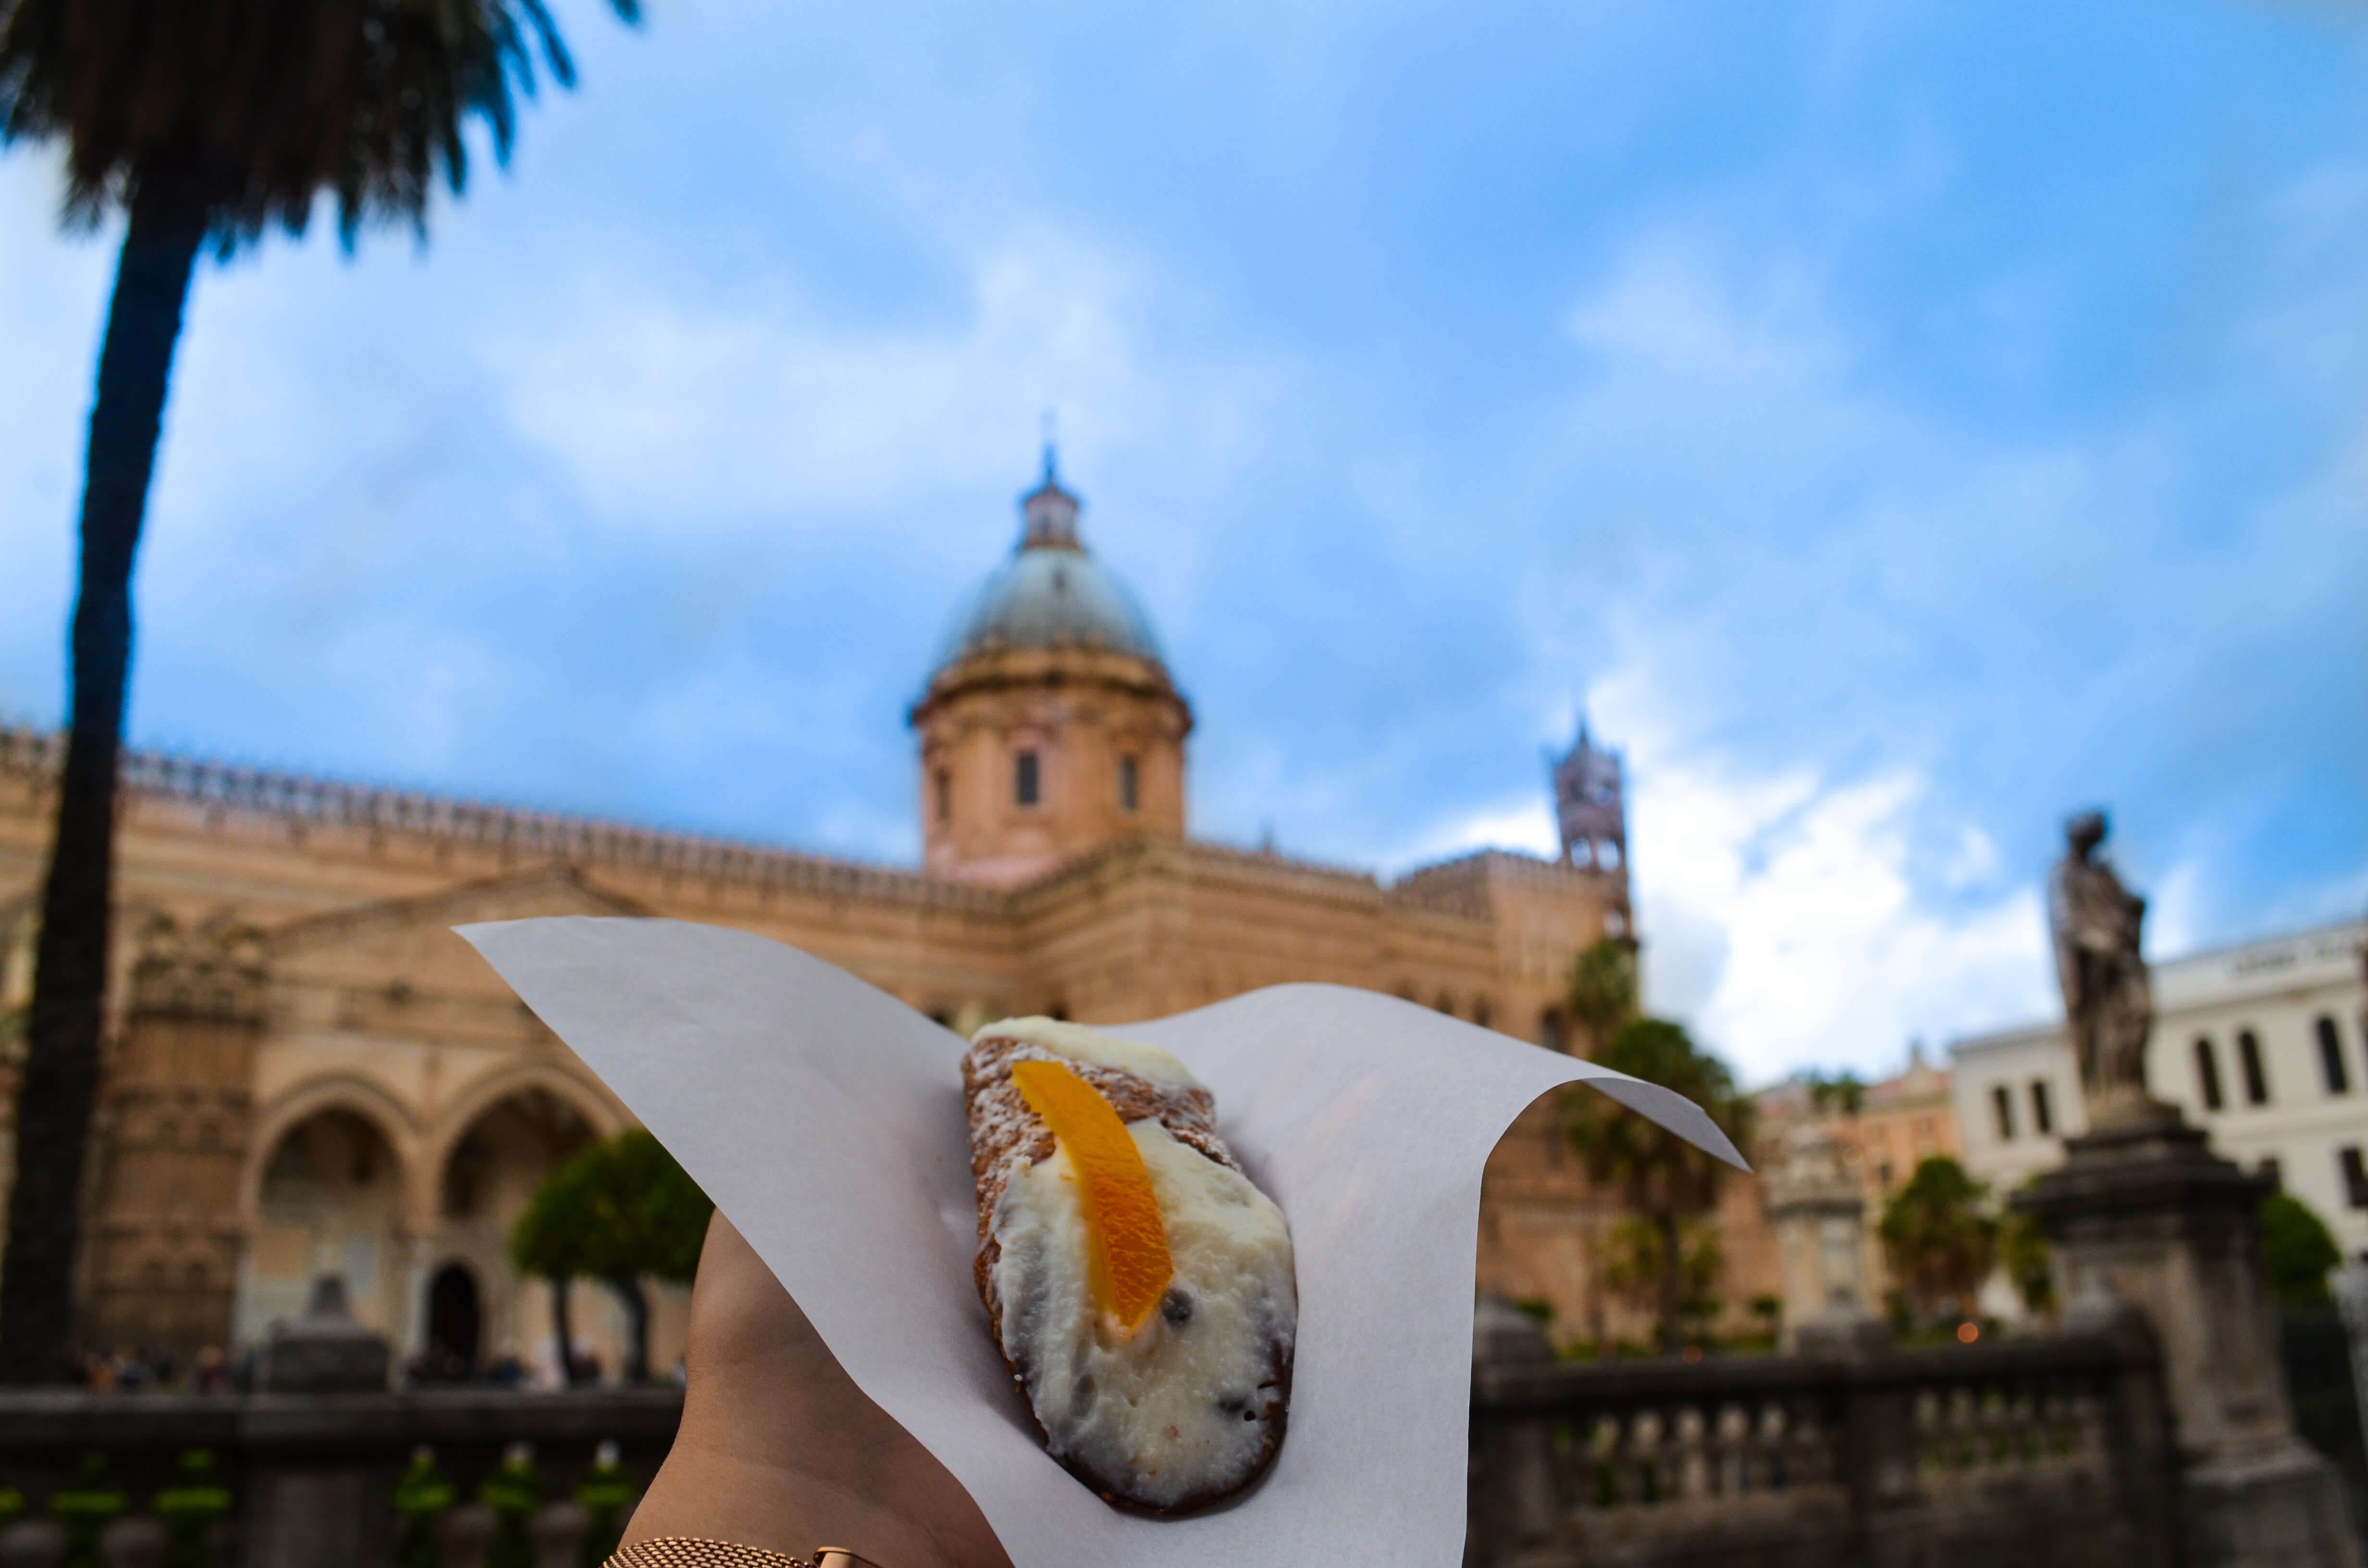 Palermo street food tour with Streaty - Cannoli and Palermo cathedral